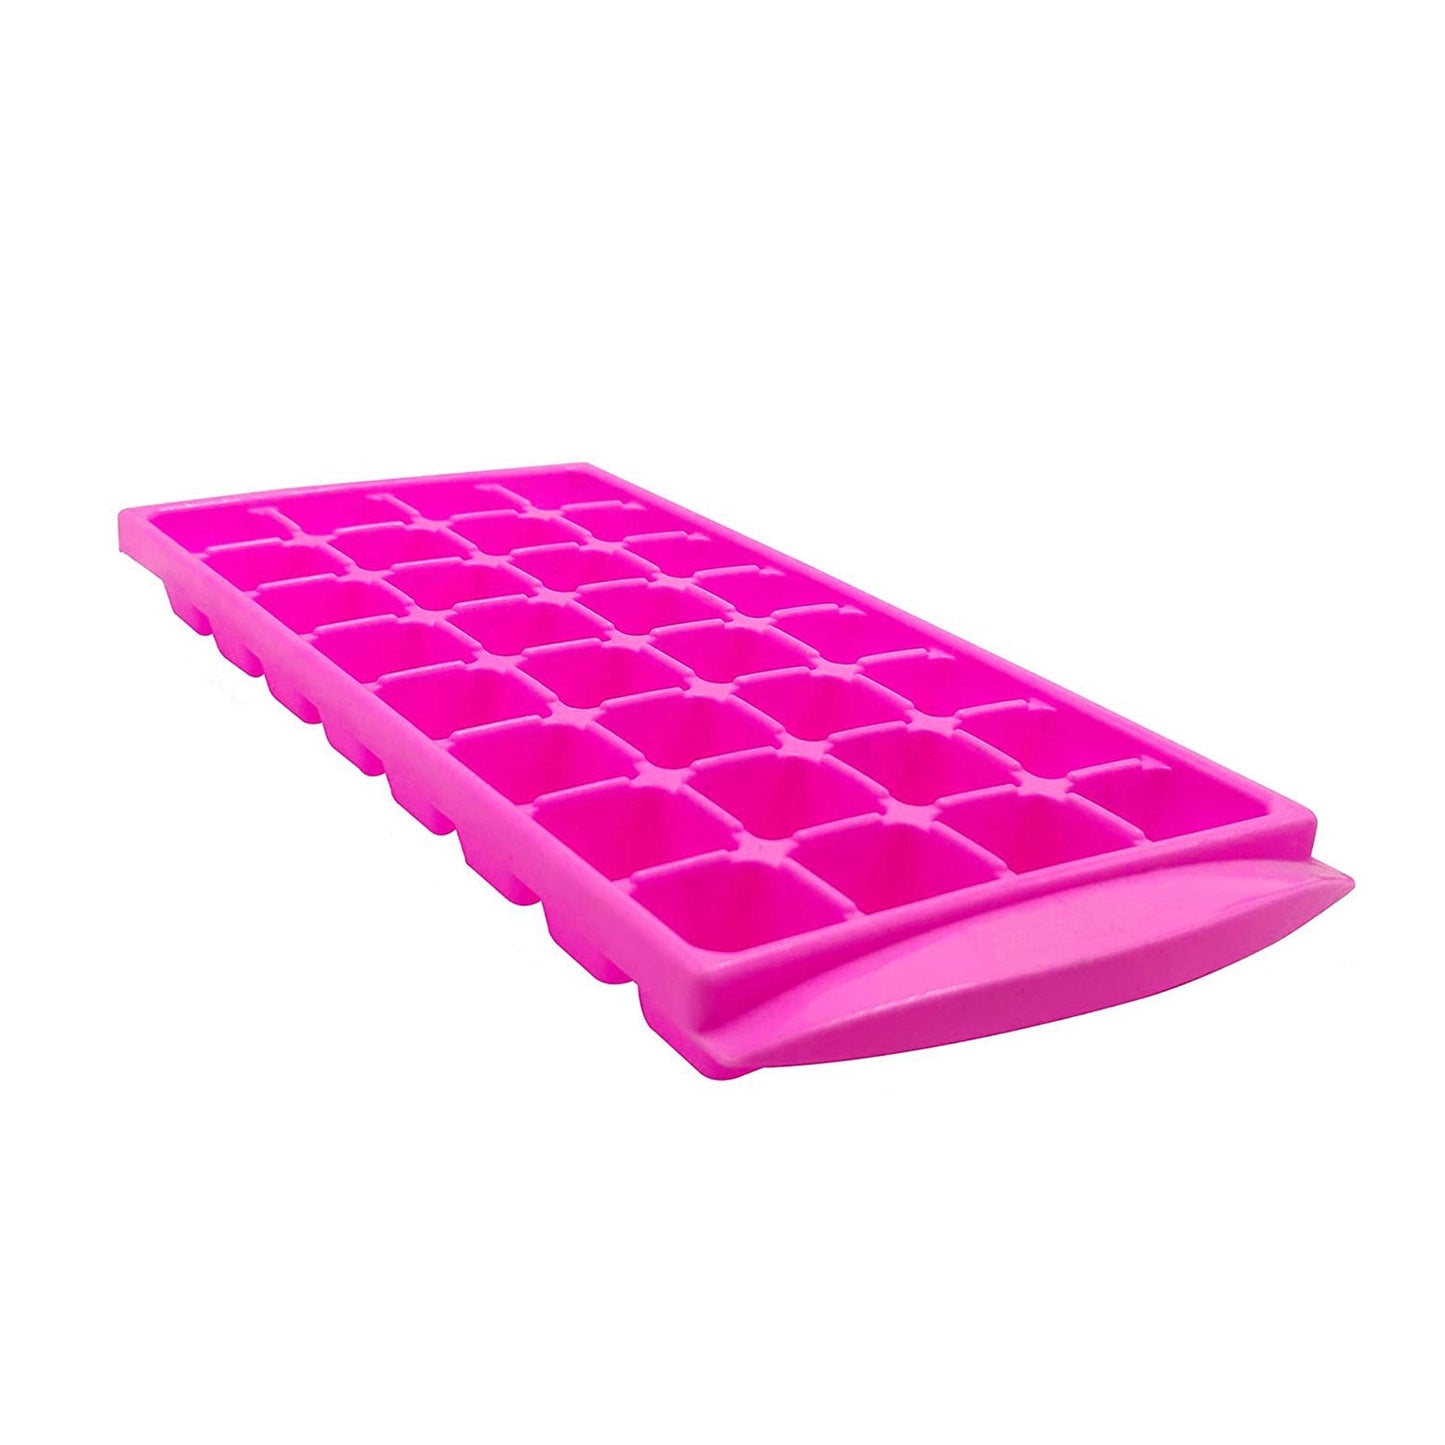 2795 32 Cavity Ice Tray For Making And Creating Ice Cubes Easily. - SWASTIK CREATIONS The Trend Point SWASTIK CREATIONS The Trend Point